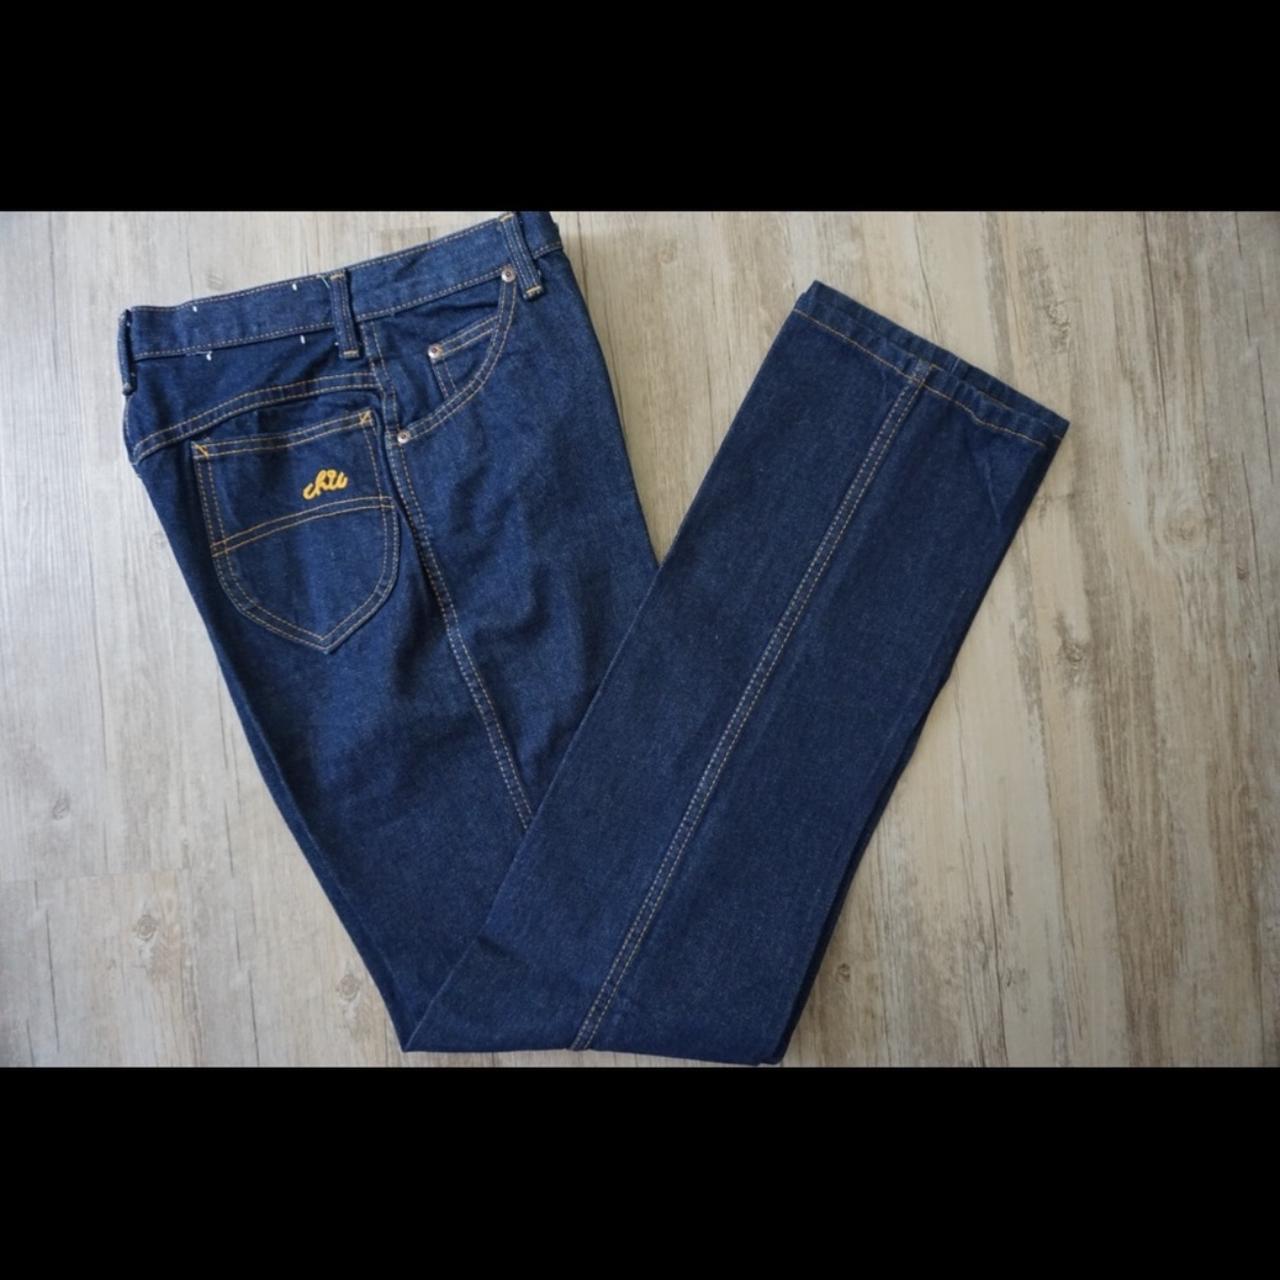 Vintage CHIC Jeans / 80s High Waisted Jeans Size 18 MOM -  Canada